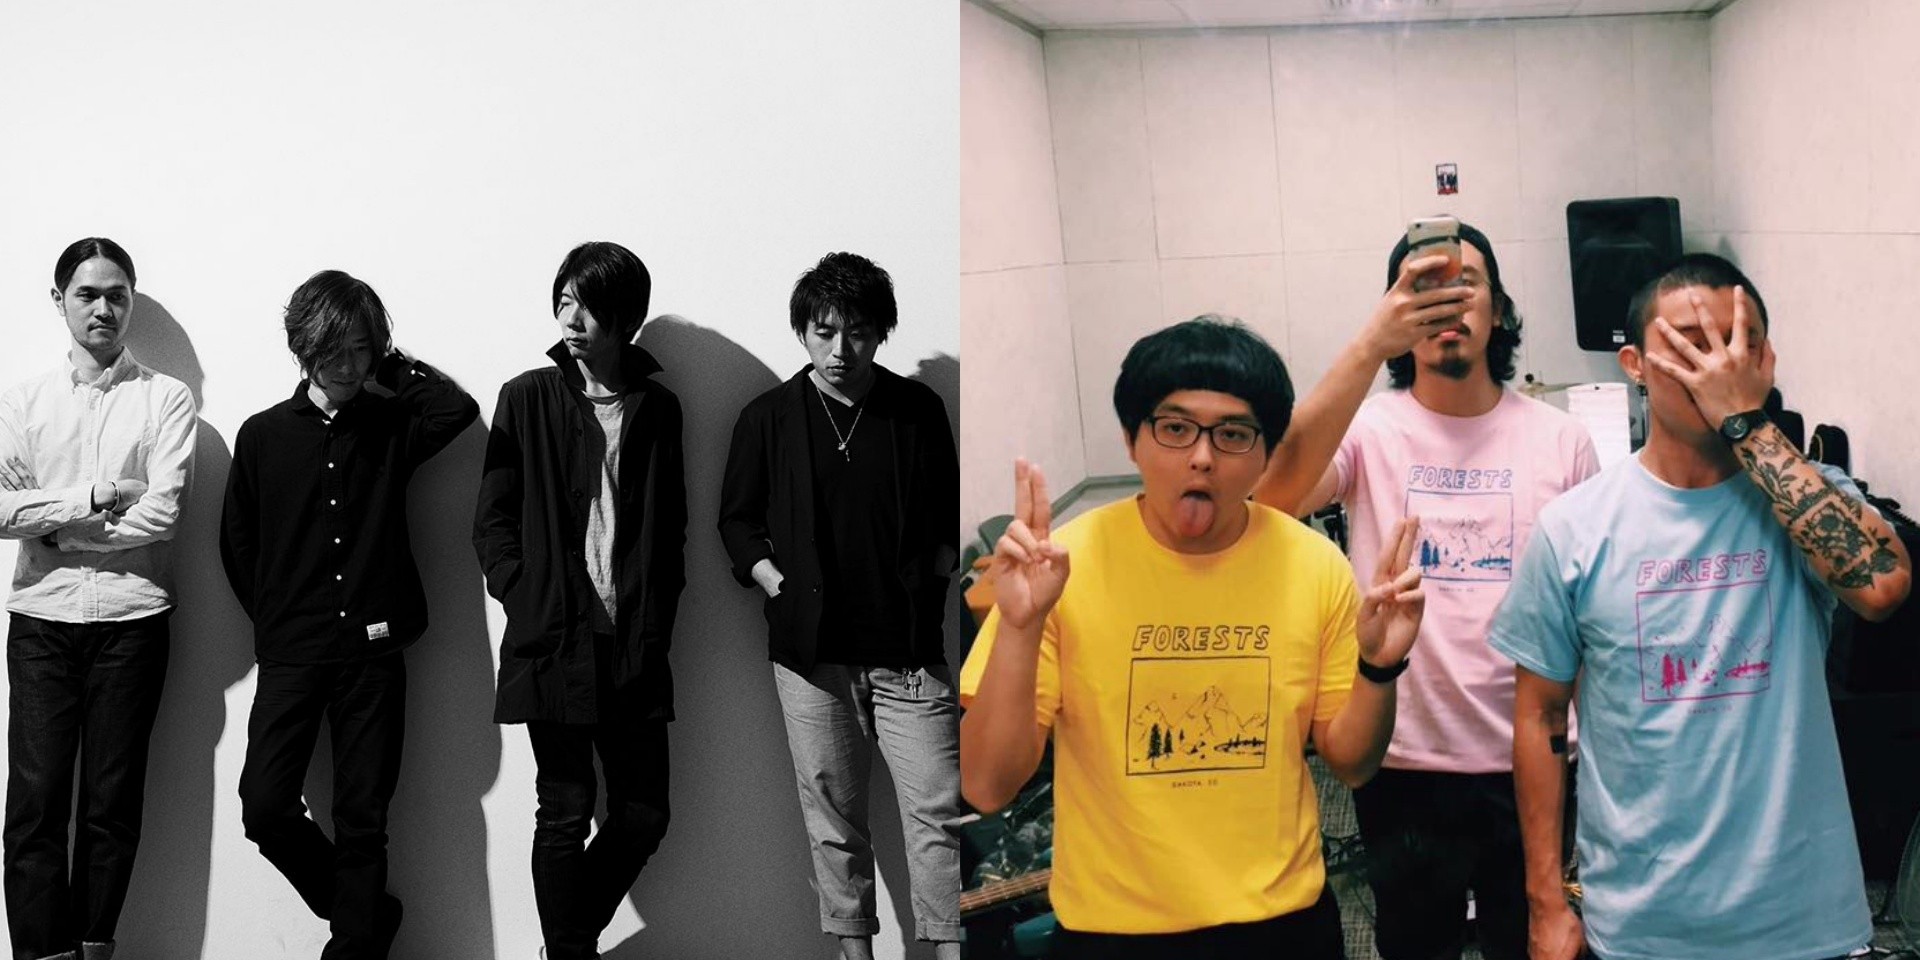 LITE, Forests and more to perform at NUS Arts Festival